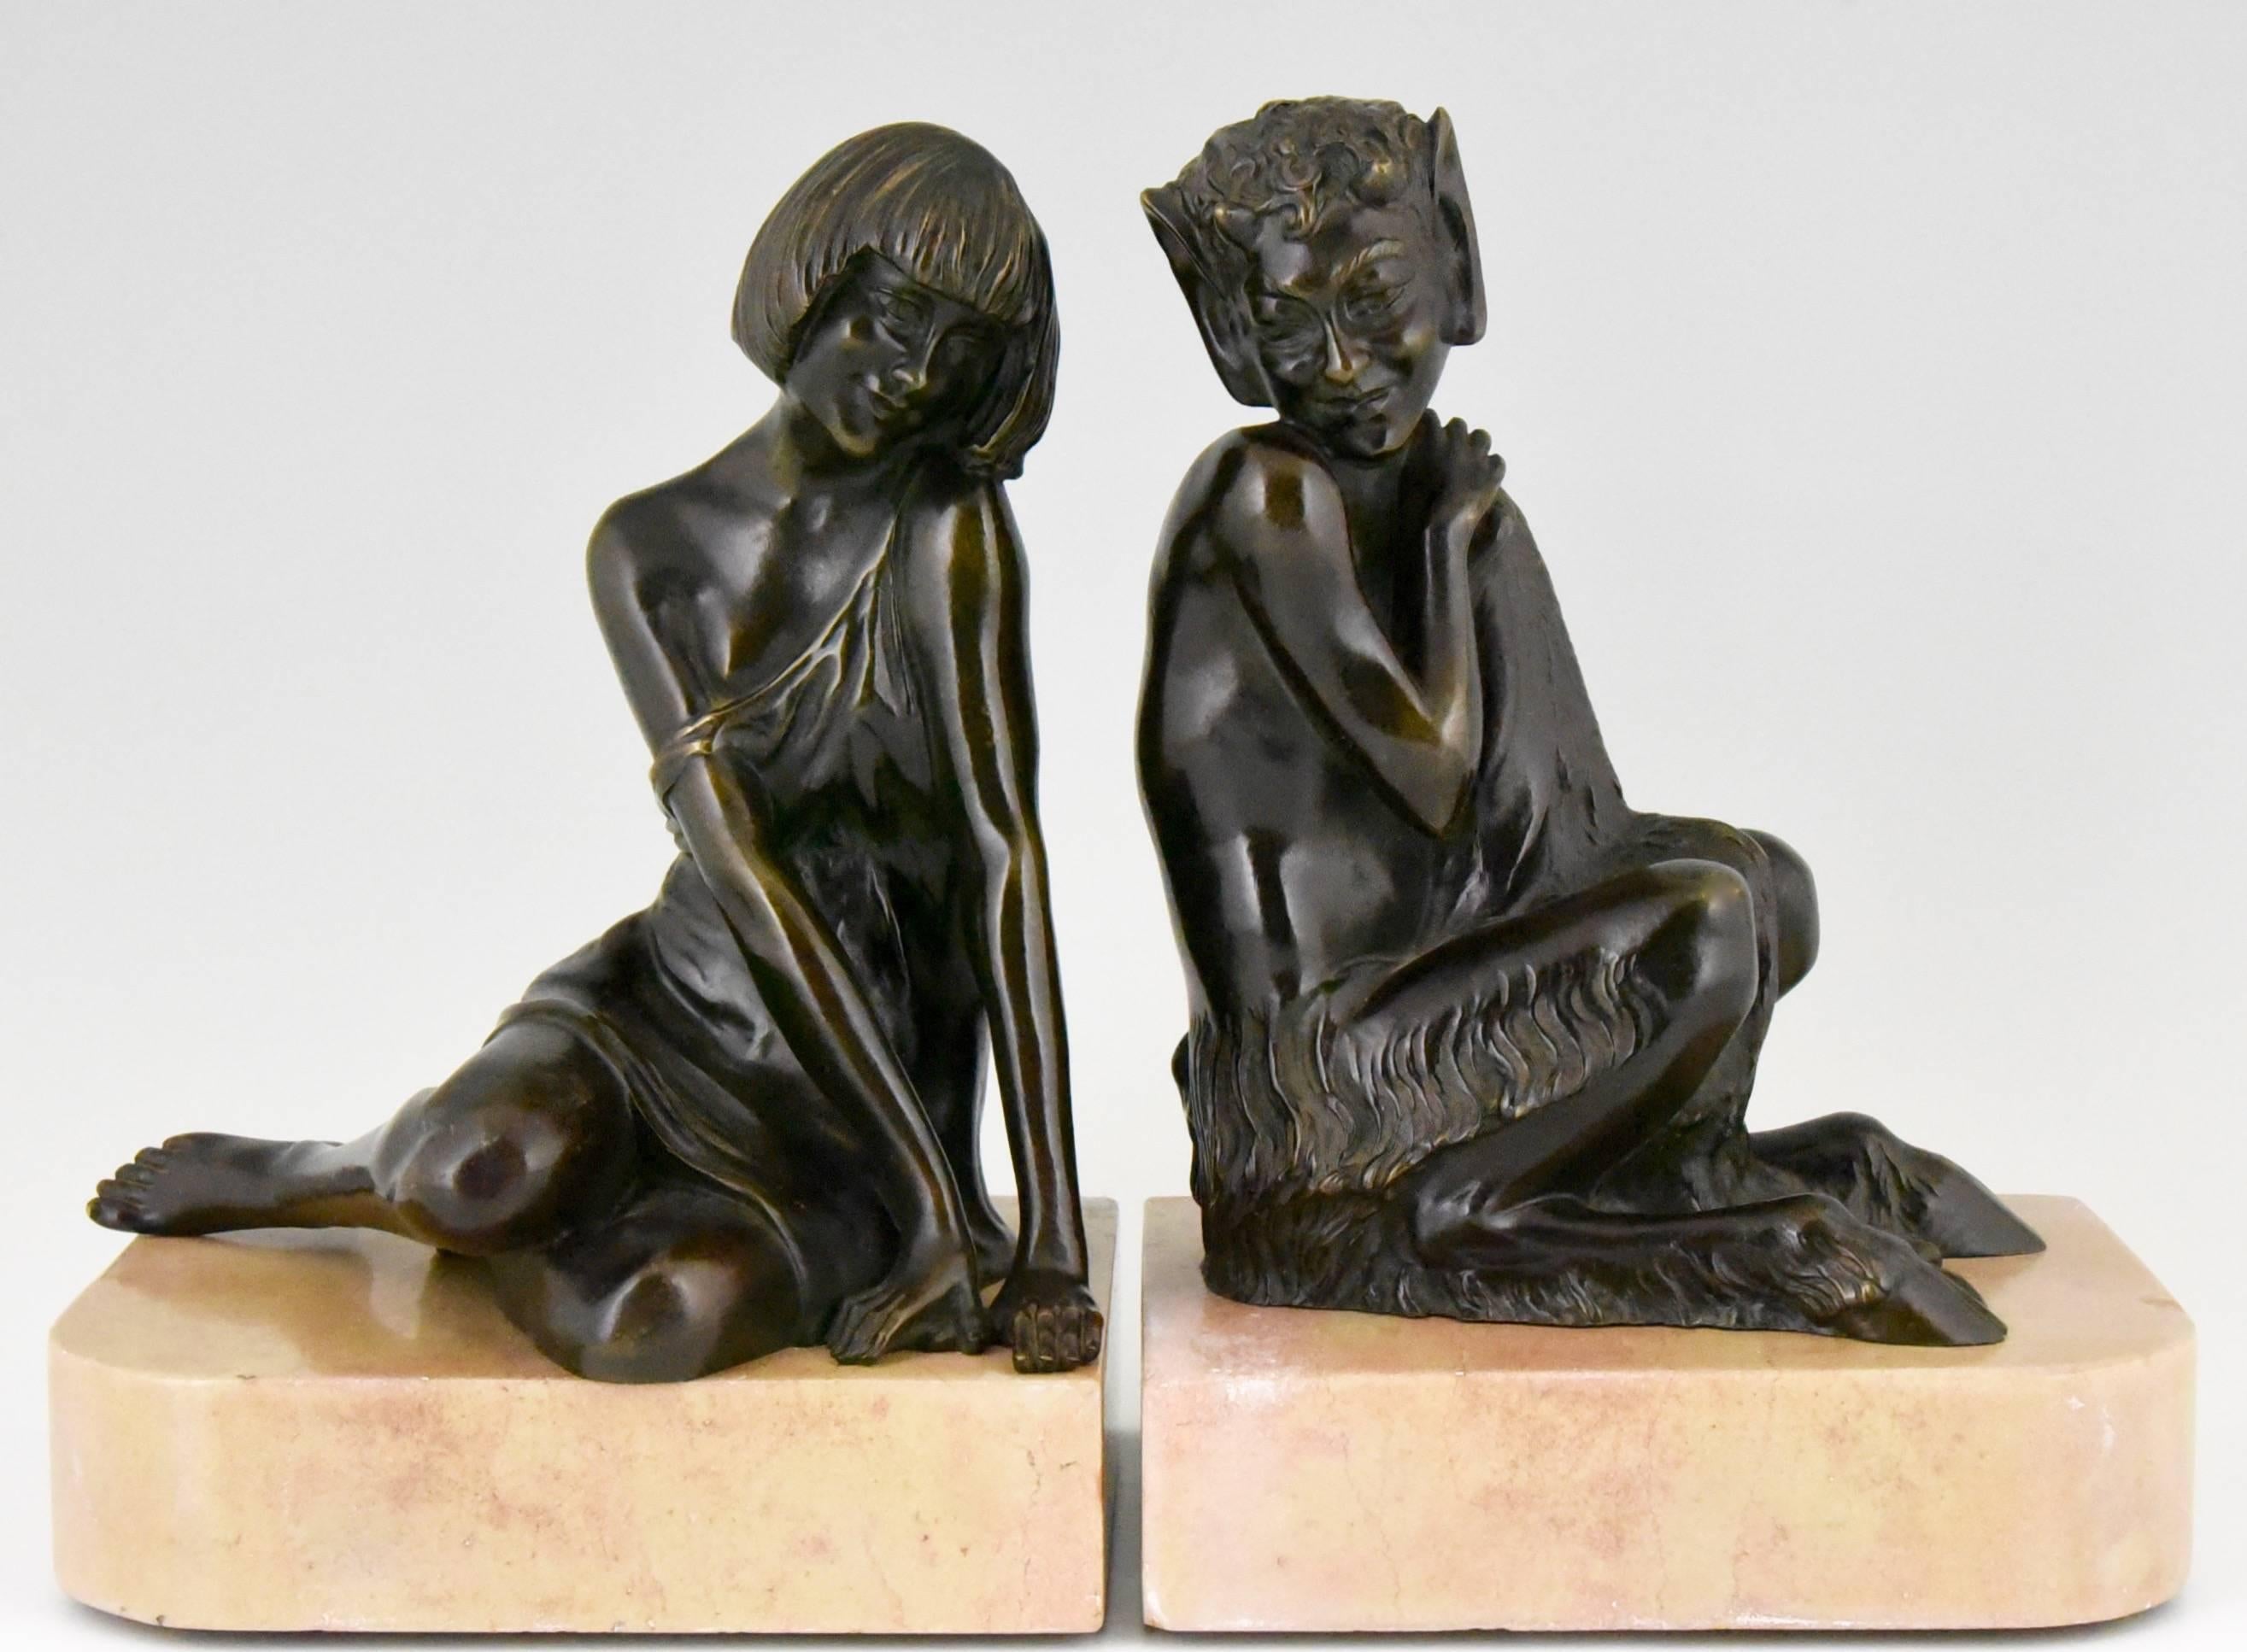 Title:  Faun and nymph. 
 Art Deco bronze bookends with a sitting satyr and nymph. 
Artist/ maker:  Le Faguays, Pierre 
Signature/ marks:  Le Faguays.  
Style: Art Deco.
Condition:  Very good condition.  
Minor restorations to the rim of the marble